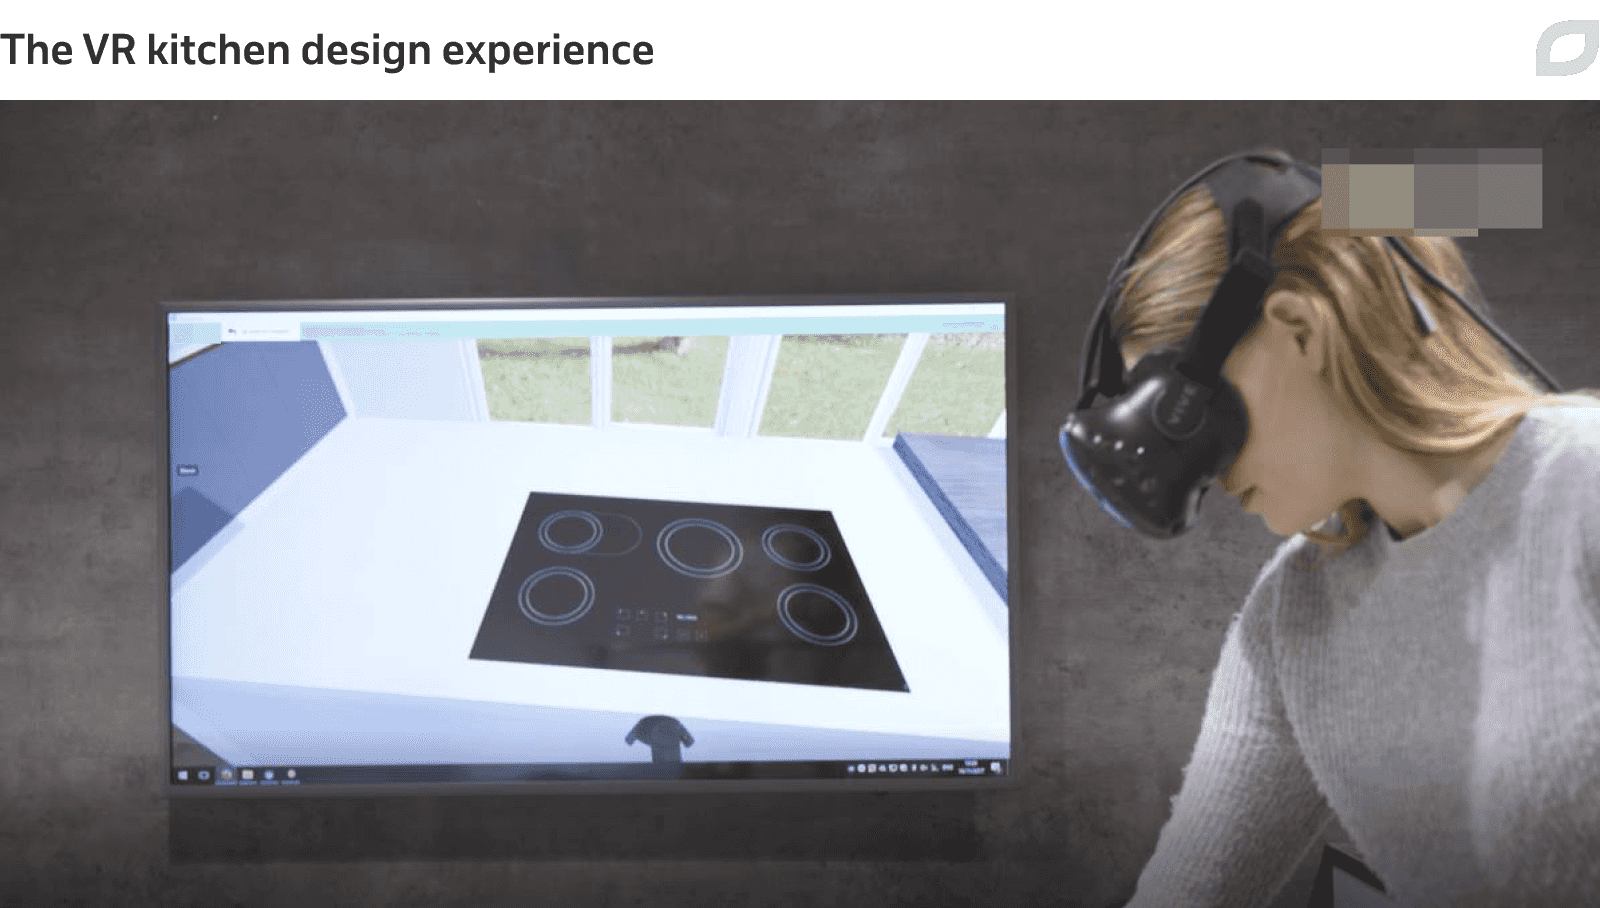 The VR kitchen design experience